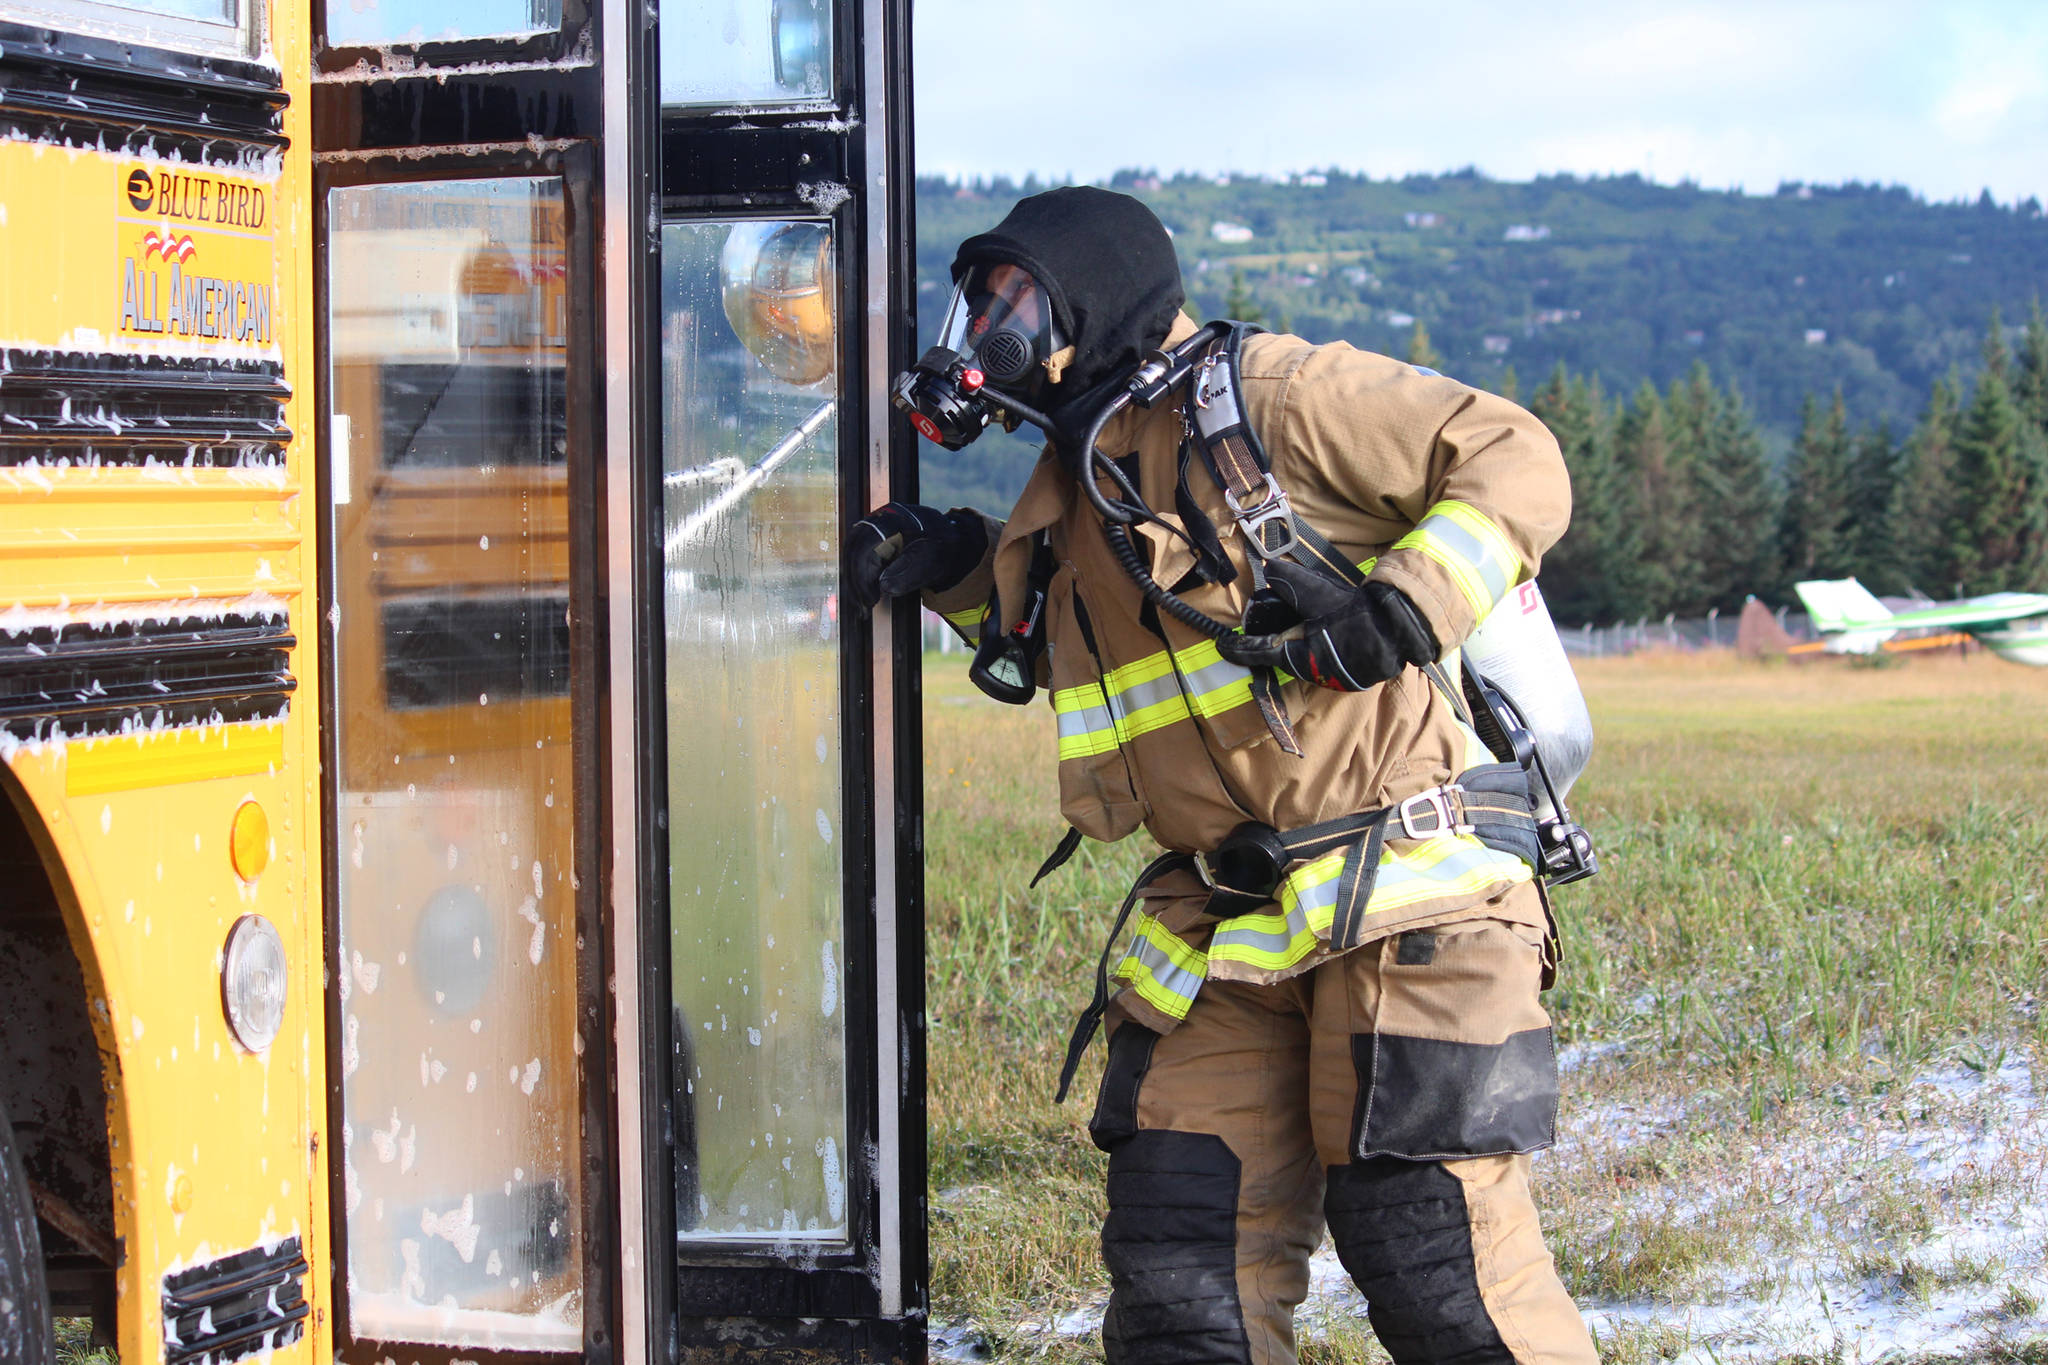 Firefighter Jesse Sherwood peers into a bus after spraying it down with foam during a simulated plane crash exercise Saturday, Aug. 19, 2017 at the Homer Airport in Homer, Alaska. He and members of several area emergency response agencies, along with airport personnel, completed the drill with the help of more than 20 volunteer “victims.” The drill is required every three years for the airport to stay in Federal Aviation Administration compliance. (Photo by Megan Pacer/Homer News)